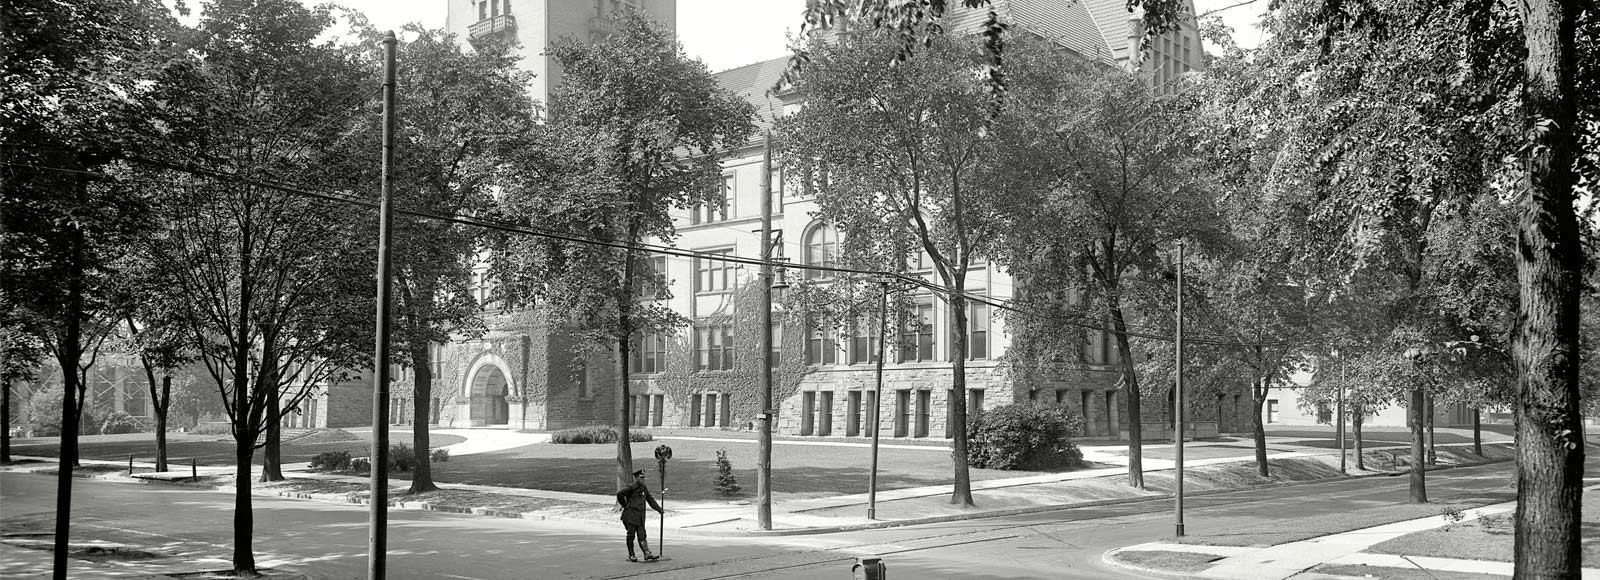 Old Main, Midtown Detroit, in the early 1900s